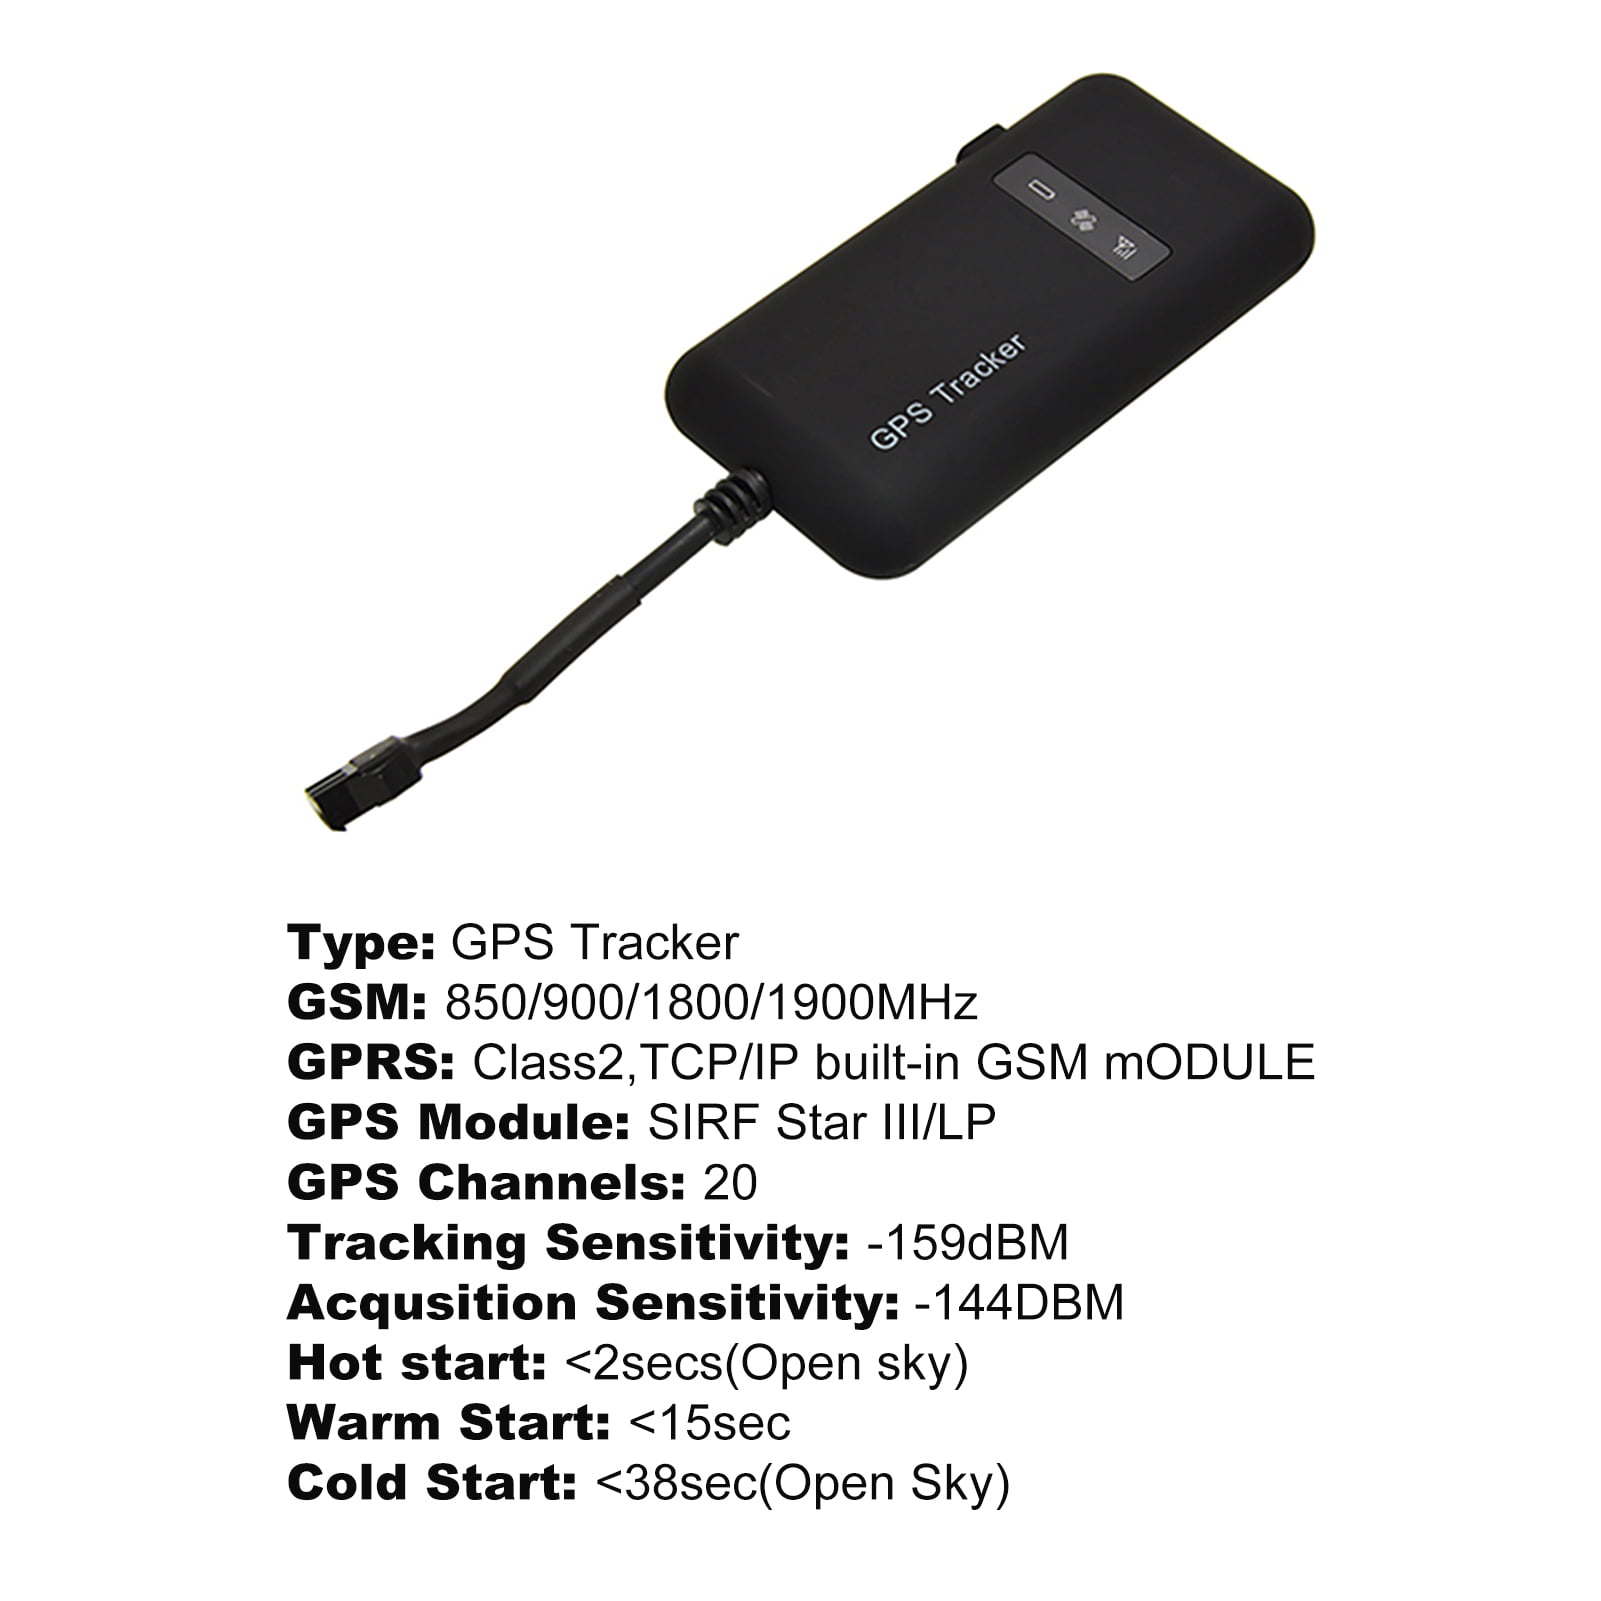 SPRING PARK GT02/TK110 GPS Tracker Accurate Hidden and Open Installation Quality Exquisite Device for Outdoor Activities - Walmart.com